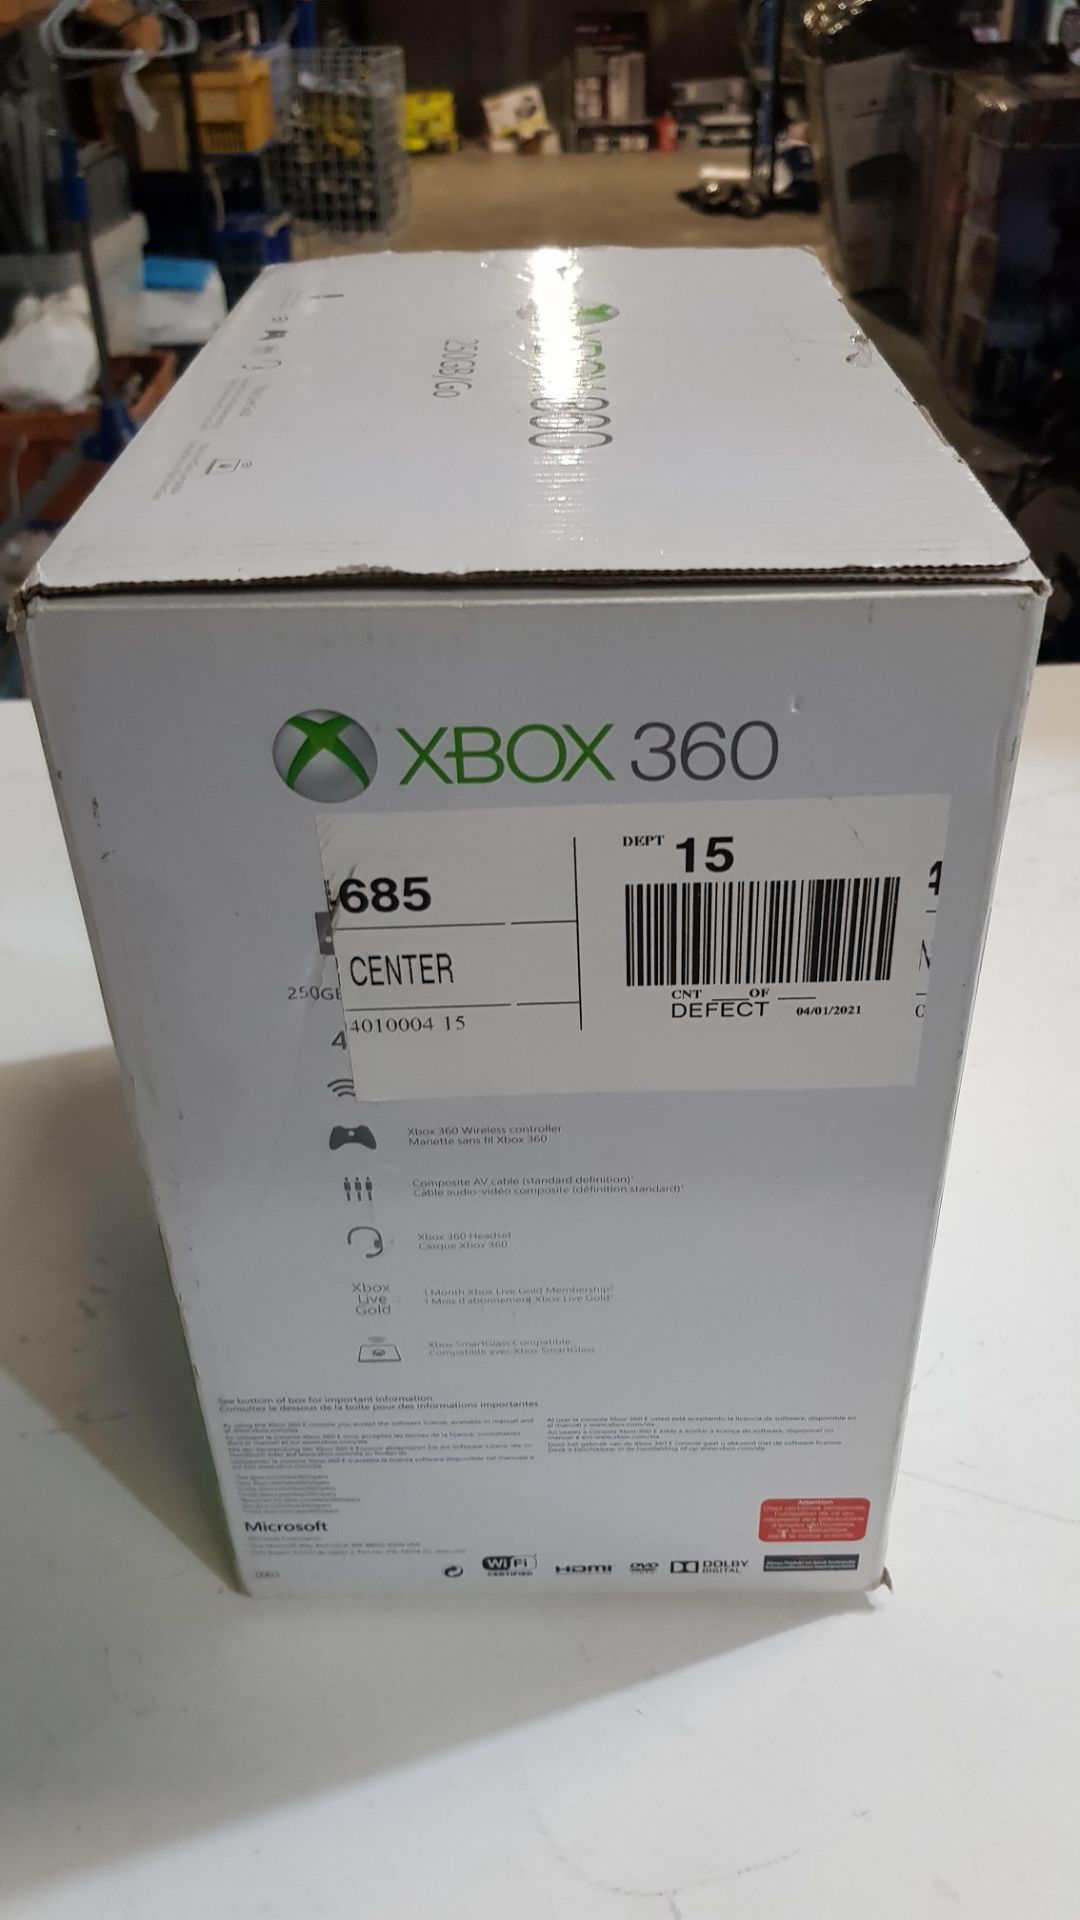 1x Xbox 360 250GB Go. New, Sealed Unit. Opened For Contents Photograph. - Image 5 of 8